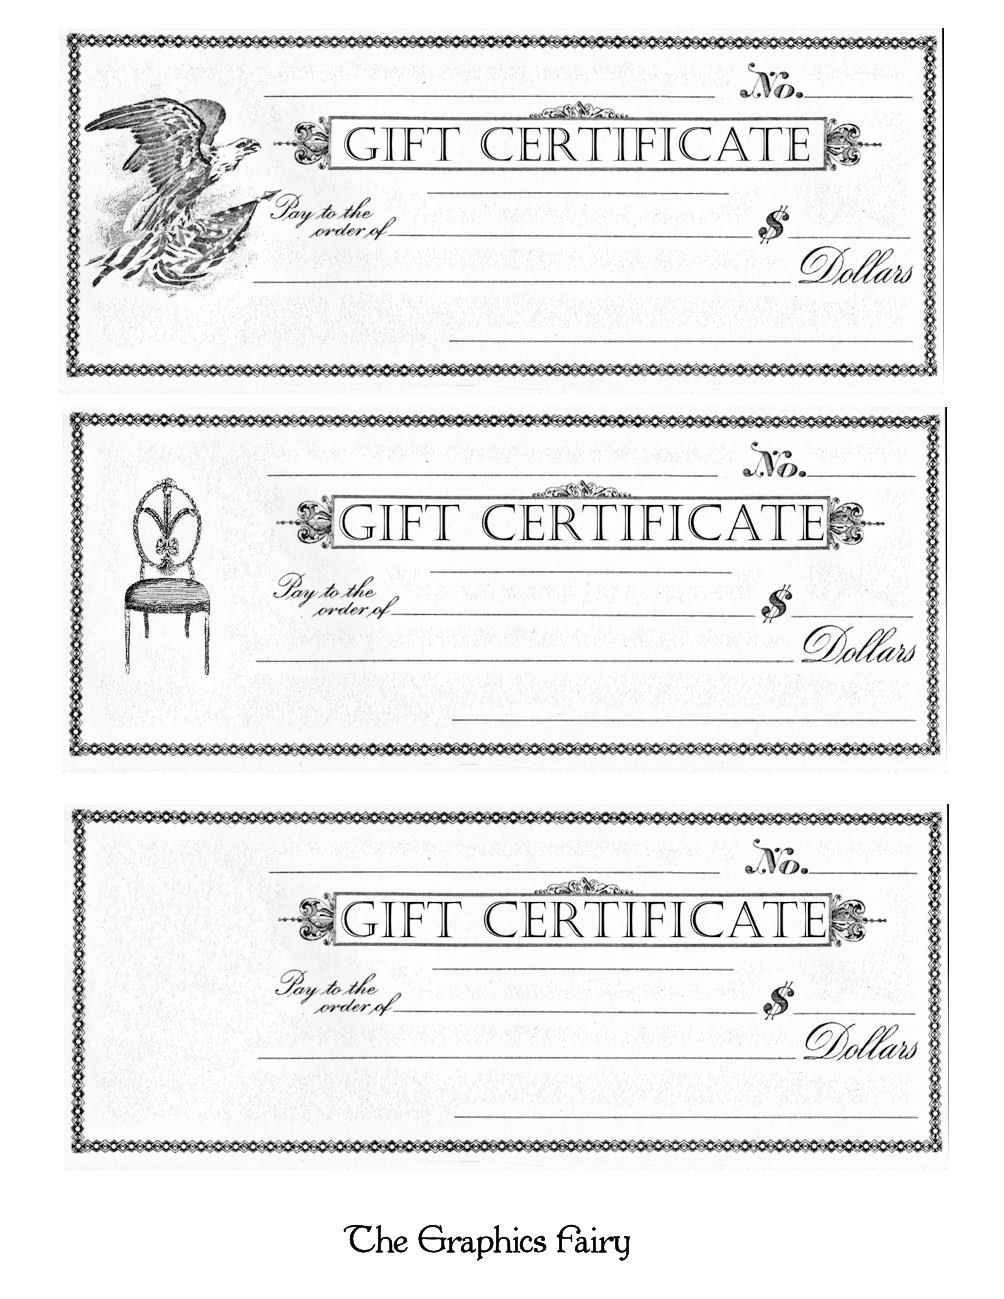 21-free-free-gift-certificate-templates-word-excel-formats